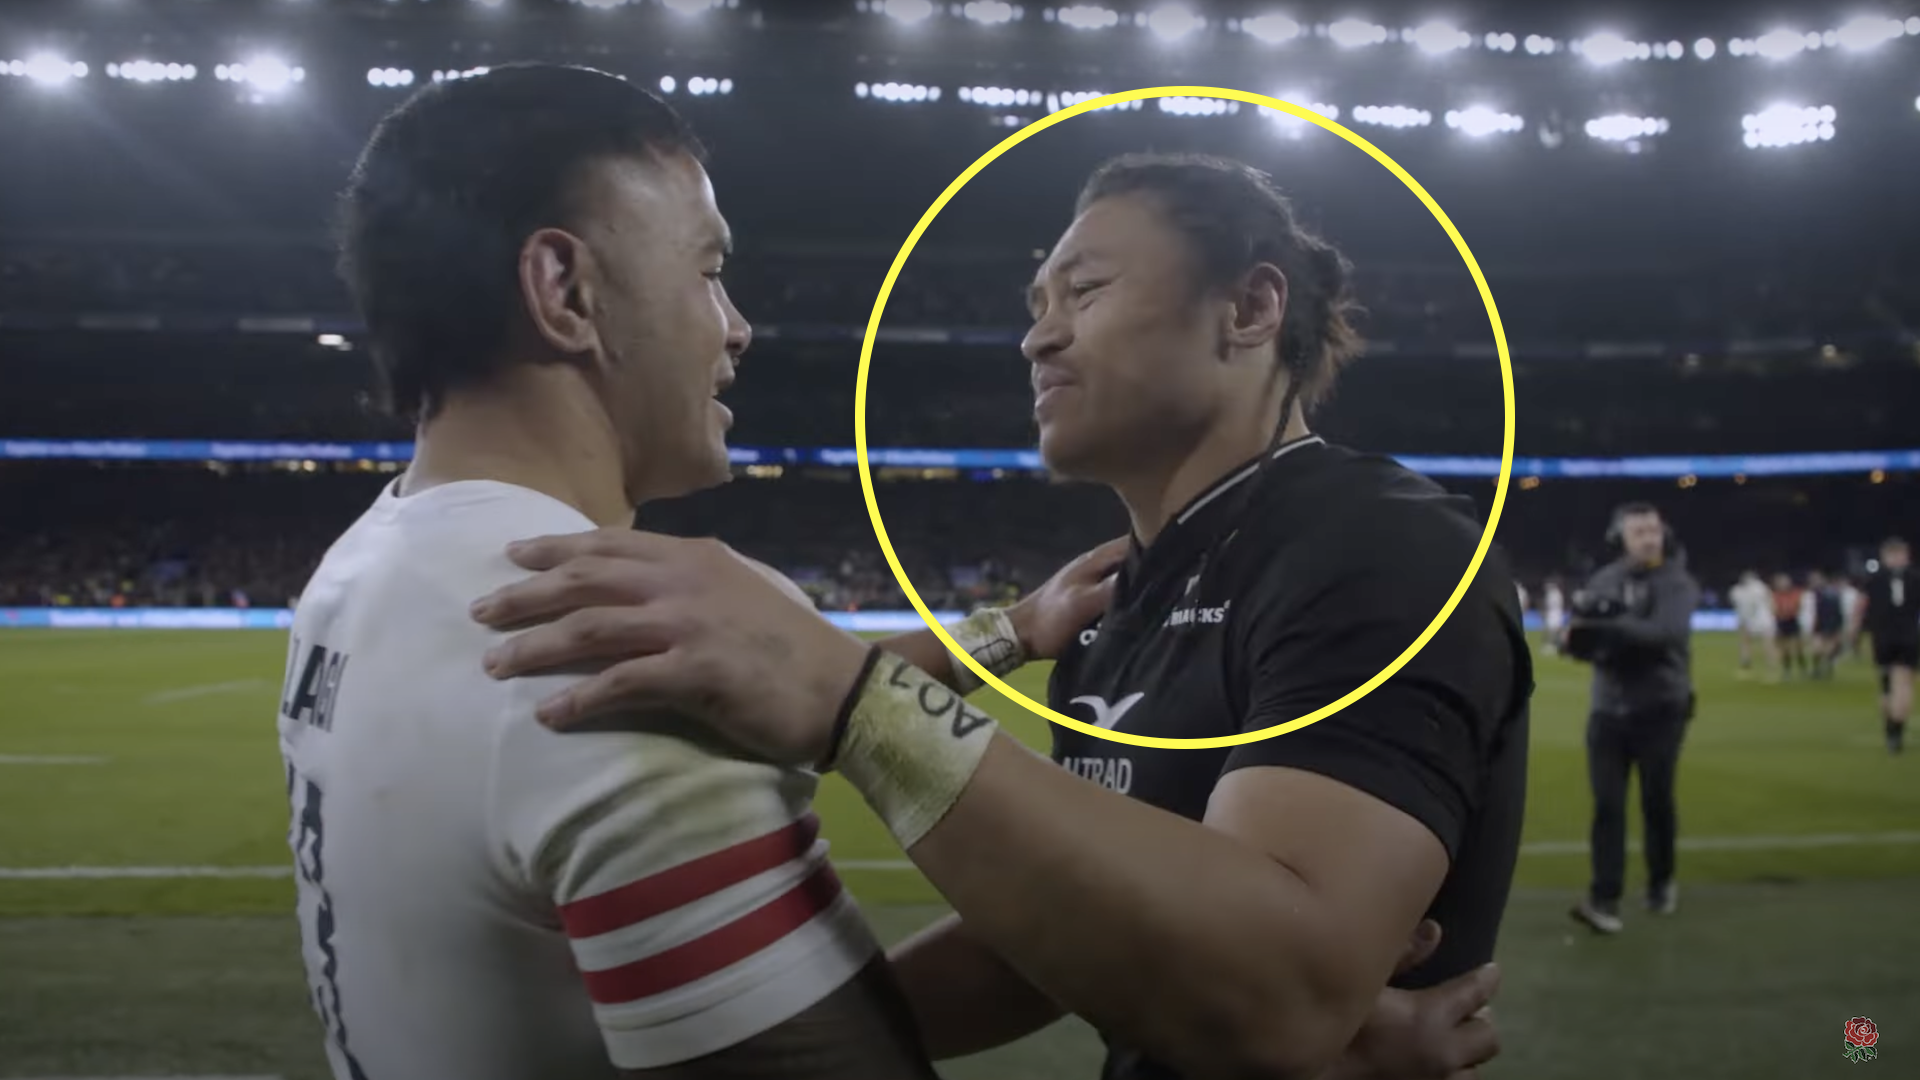 What All Blacks star said to Manu Tuilagi after having to tackle him